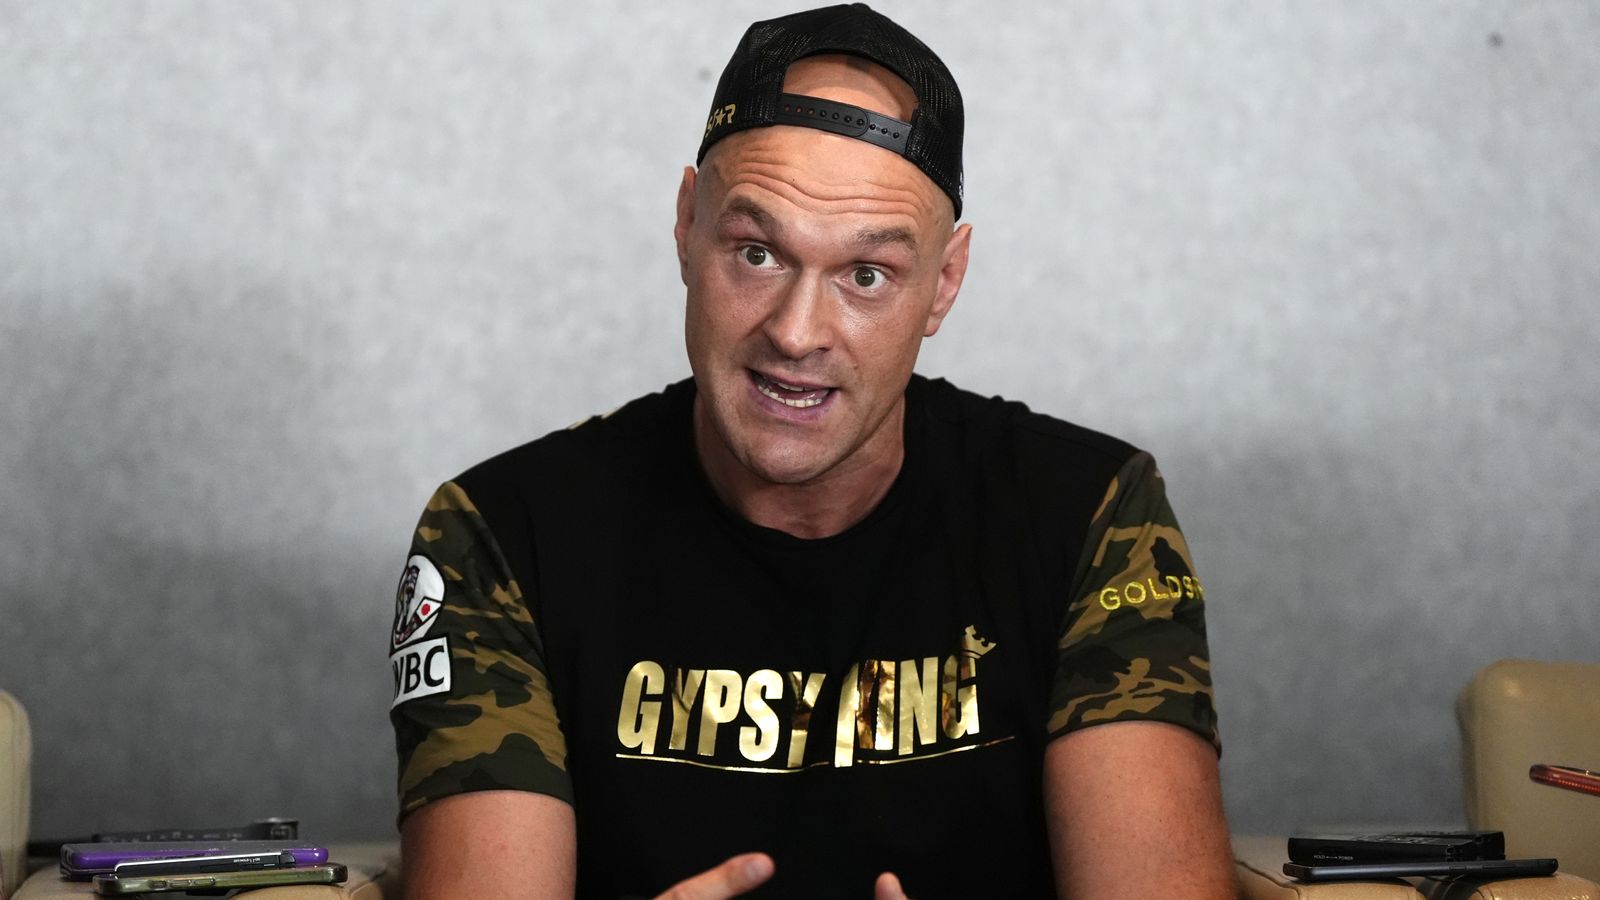 Fury vs Usyk: Tyson Fury on the dangers of boxing – ‘I know the risks, but I can’t worry about it’ | Boxing News